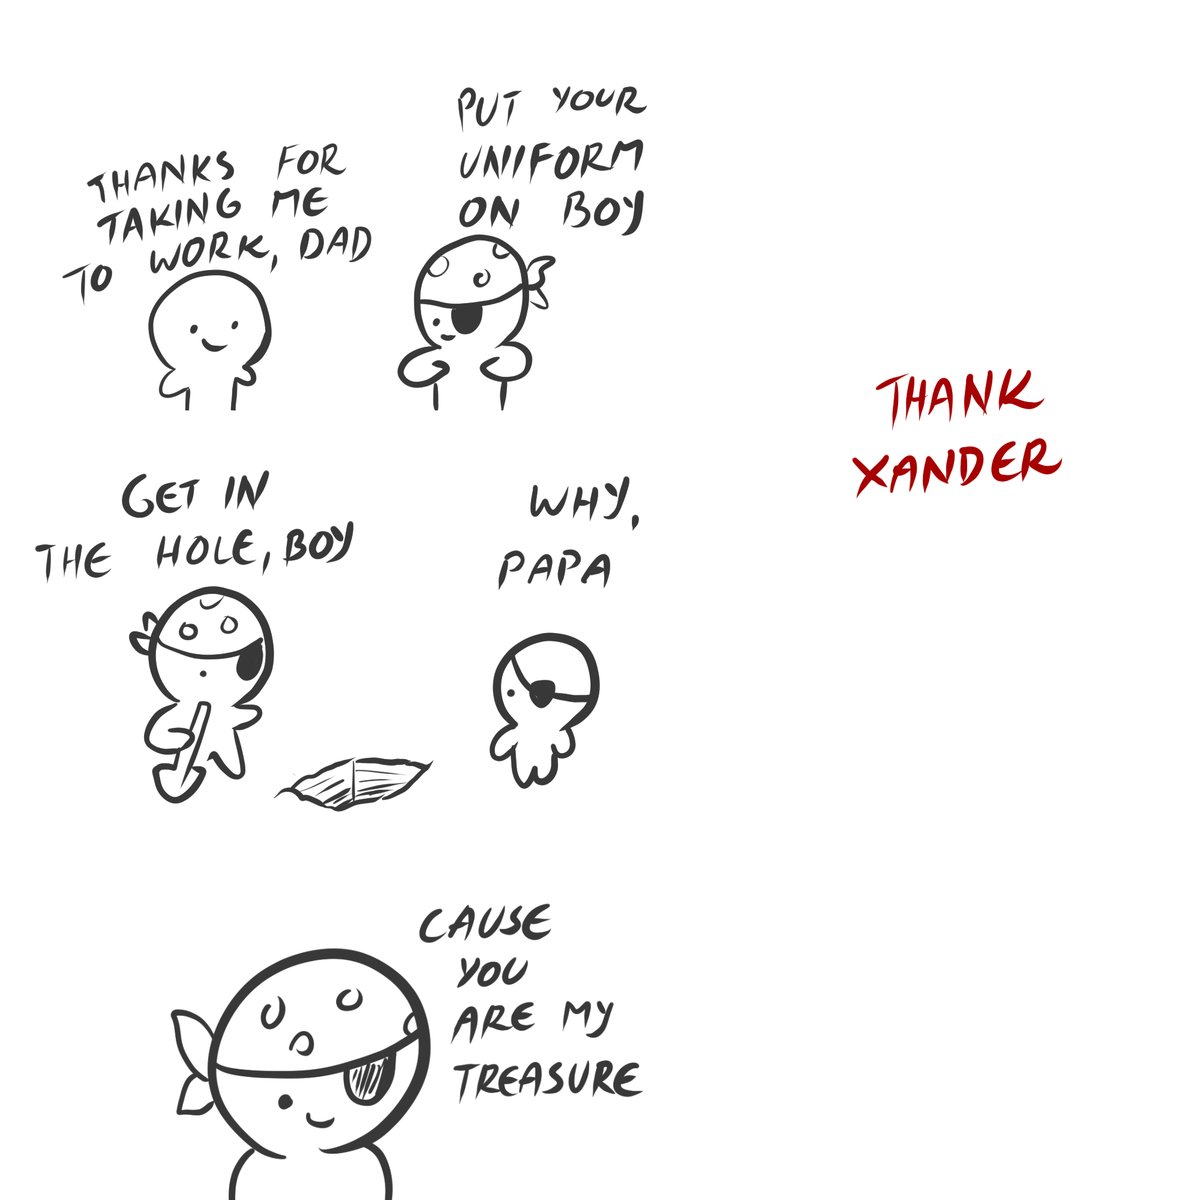 made 6 min comics based on single word prompts from my patreon supporters 